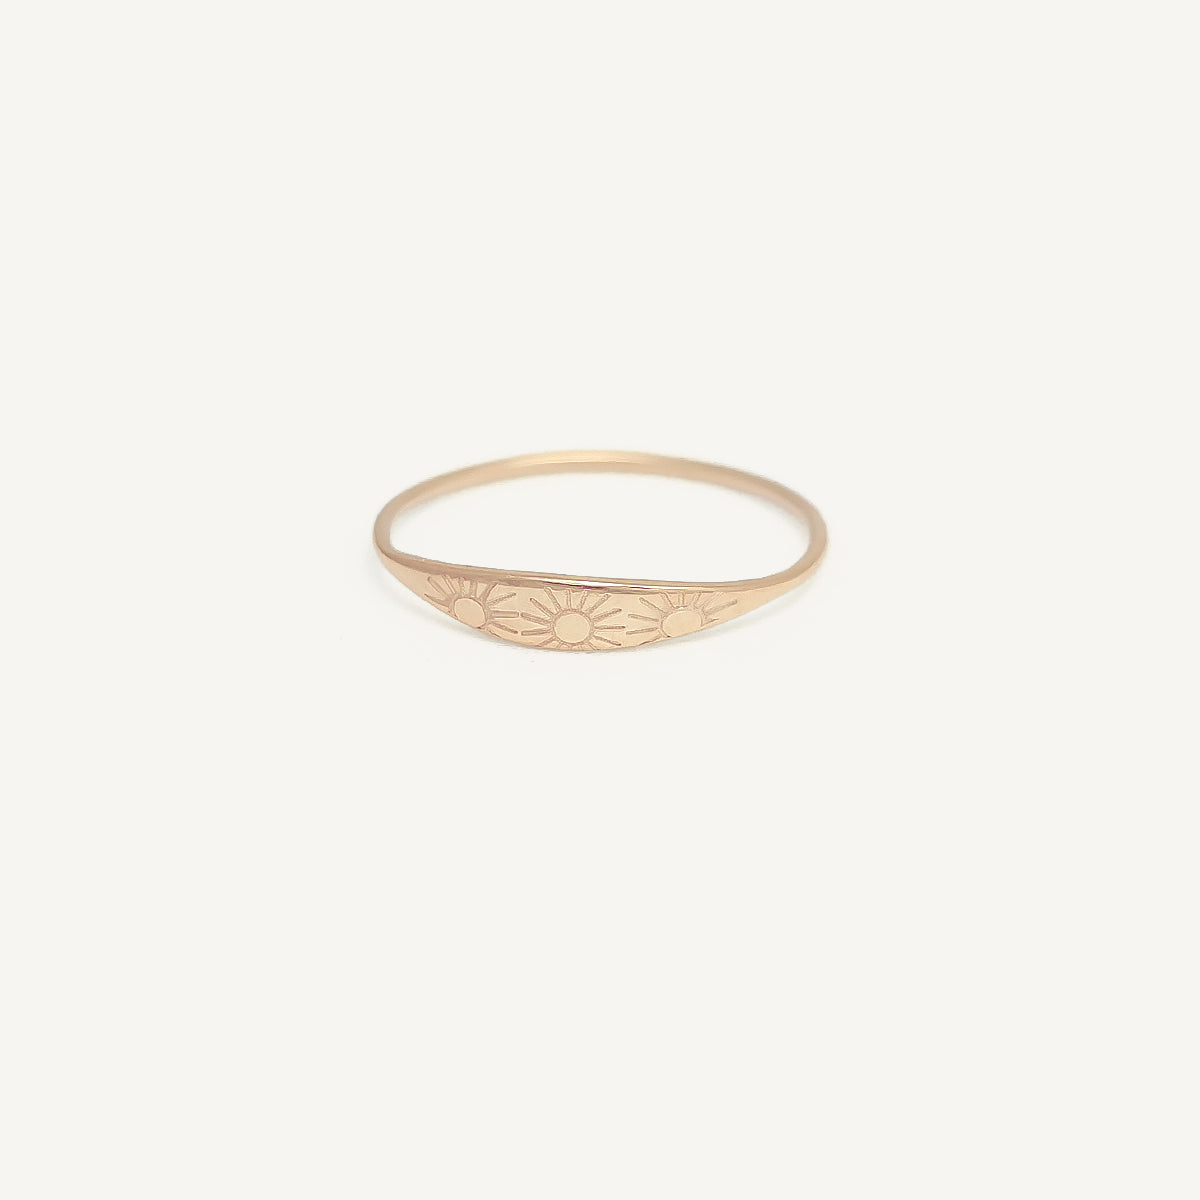 The Sun Signet Ring in Solid Gold